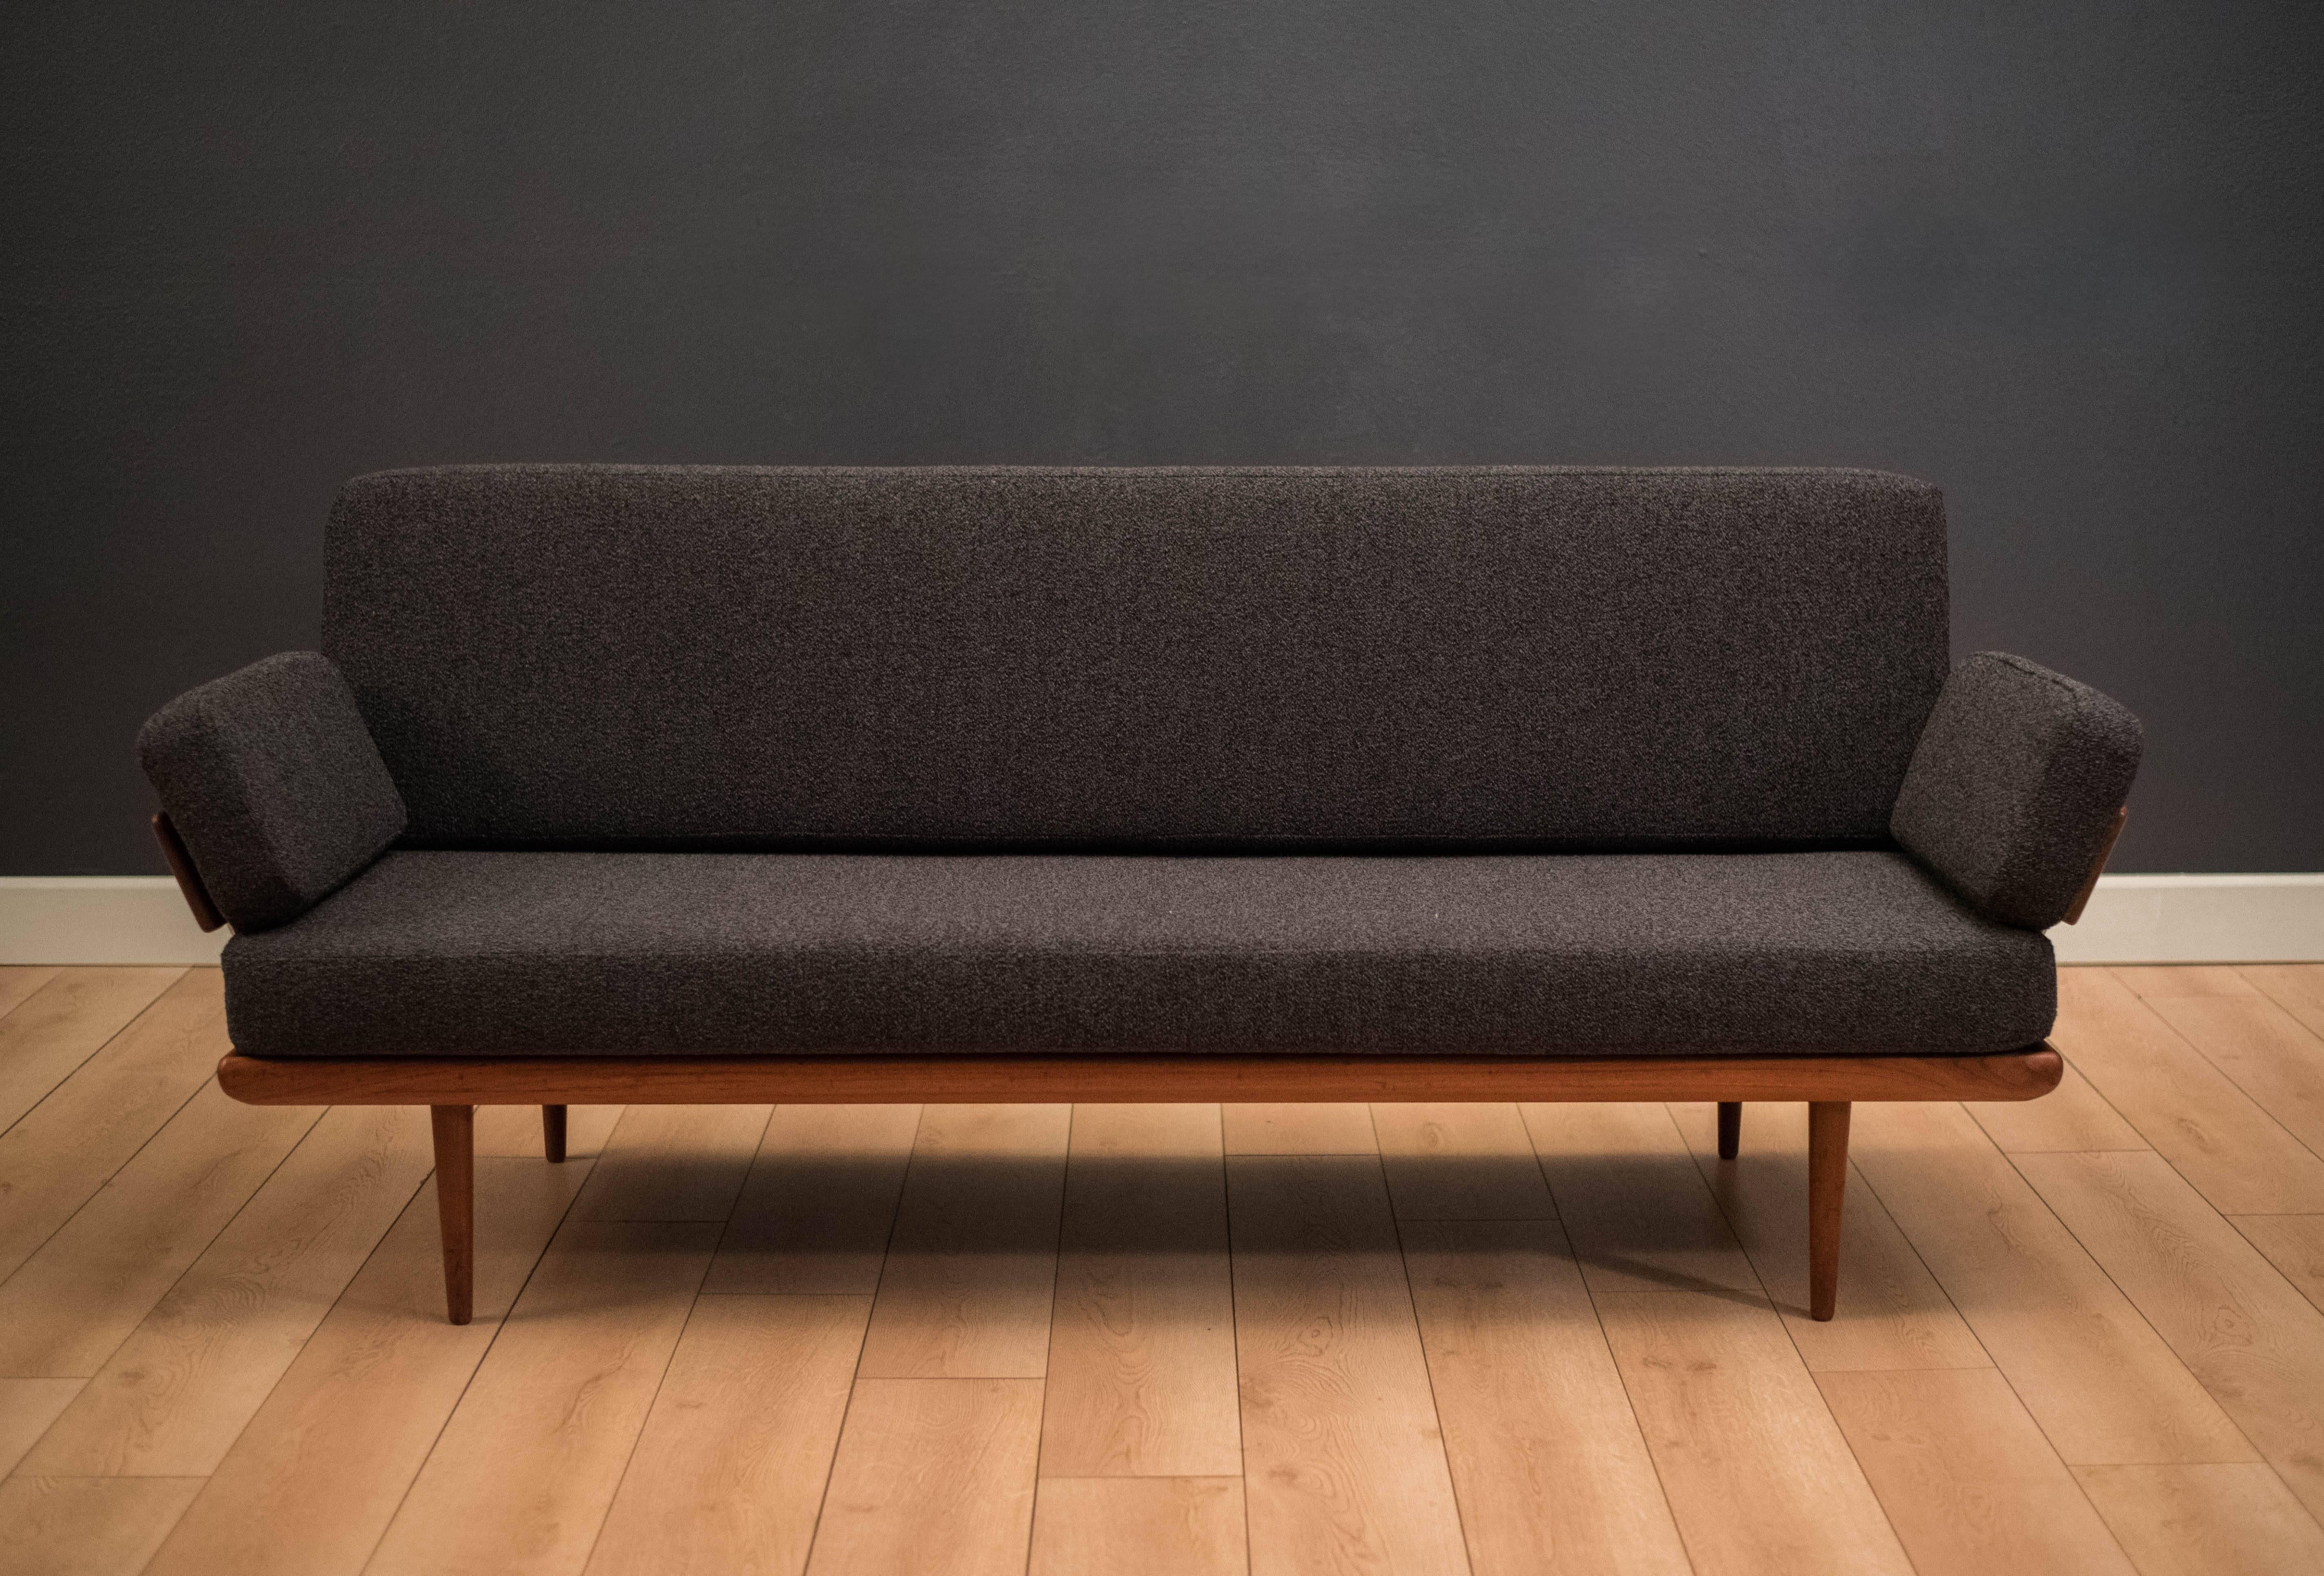 Mid-Century Modern sofa designed by Peter Hvidt and Orla Mølgaard-Nielsen for France & Son Daverkosen. This piece features a unique sculpted teak frame with chrome accents. It has been professionally reupholstered in a charcoal gray Maharam fabric